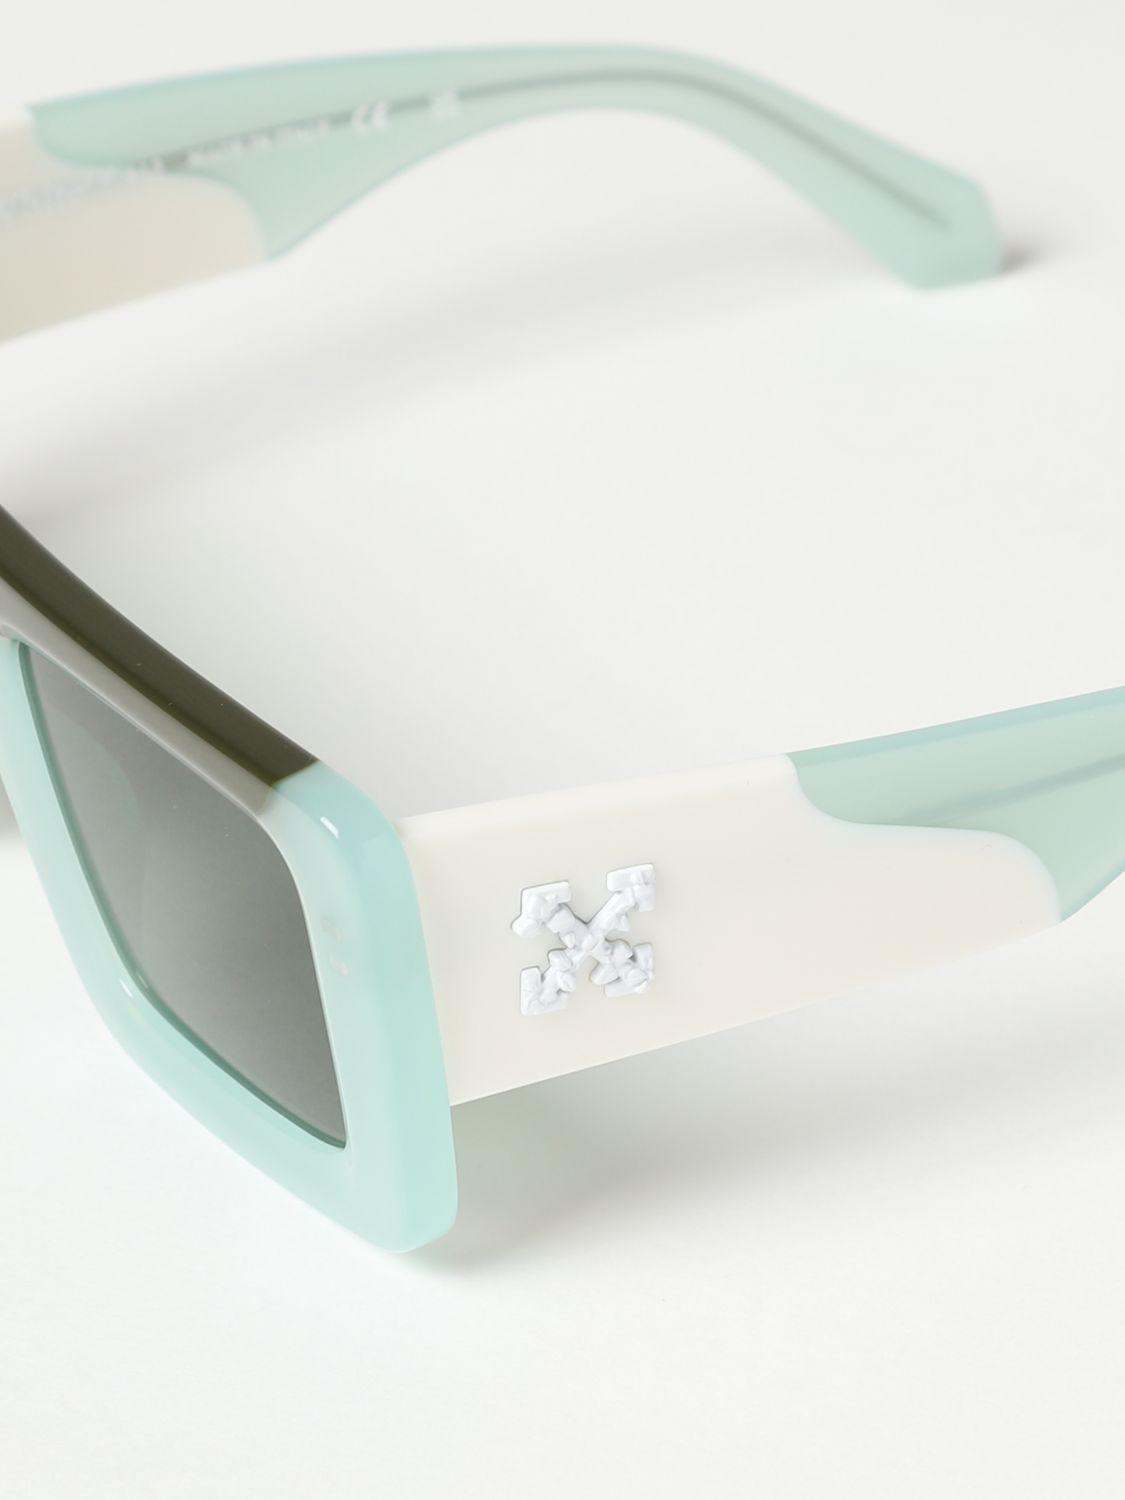 Off-White Outlet: acetate sunglasses - Blue  Off-White sunglasses OERI064  online at